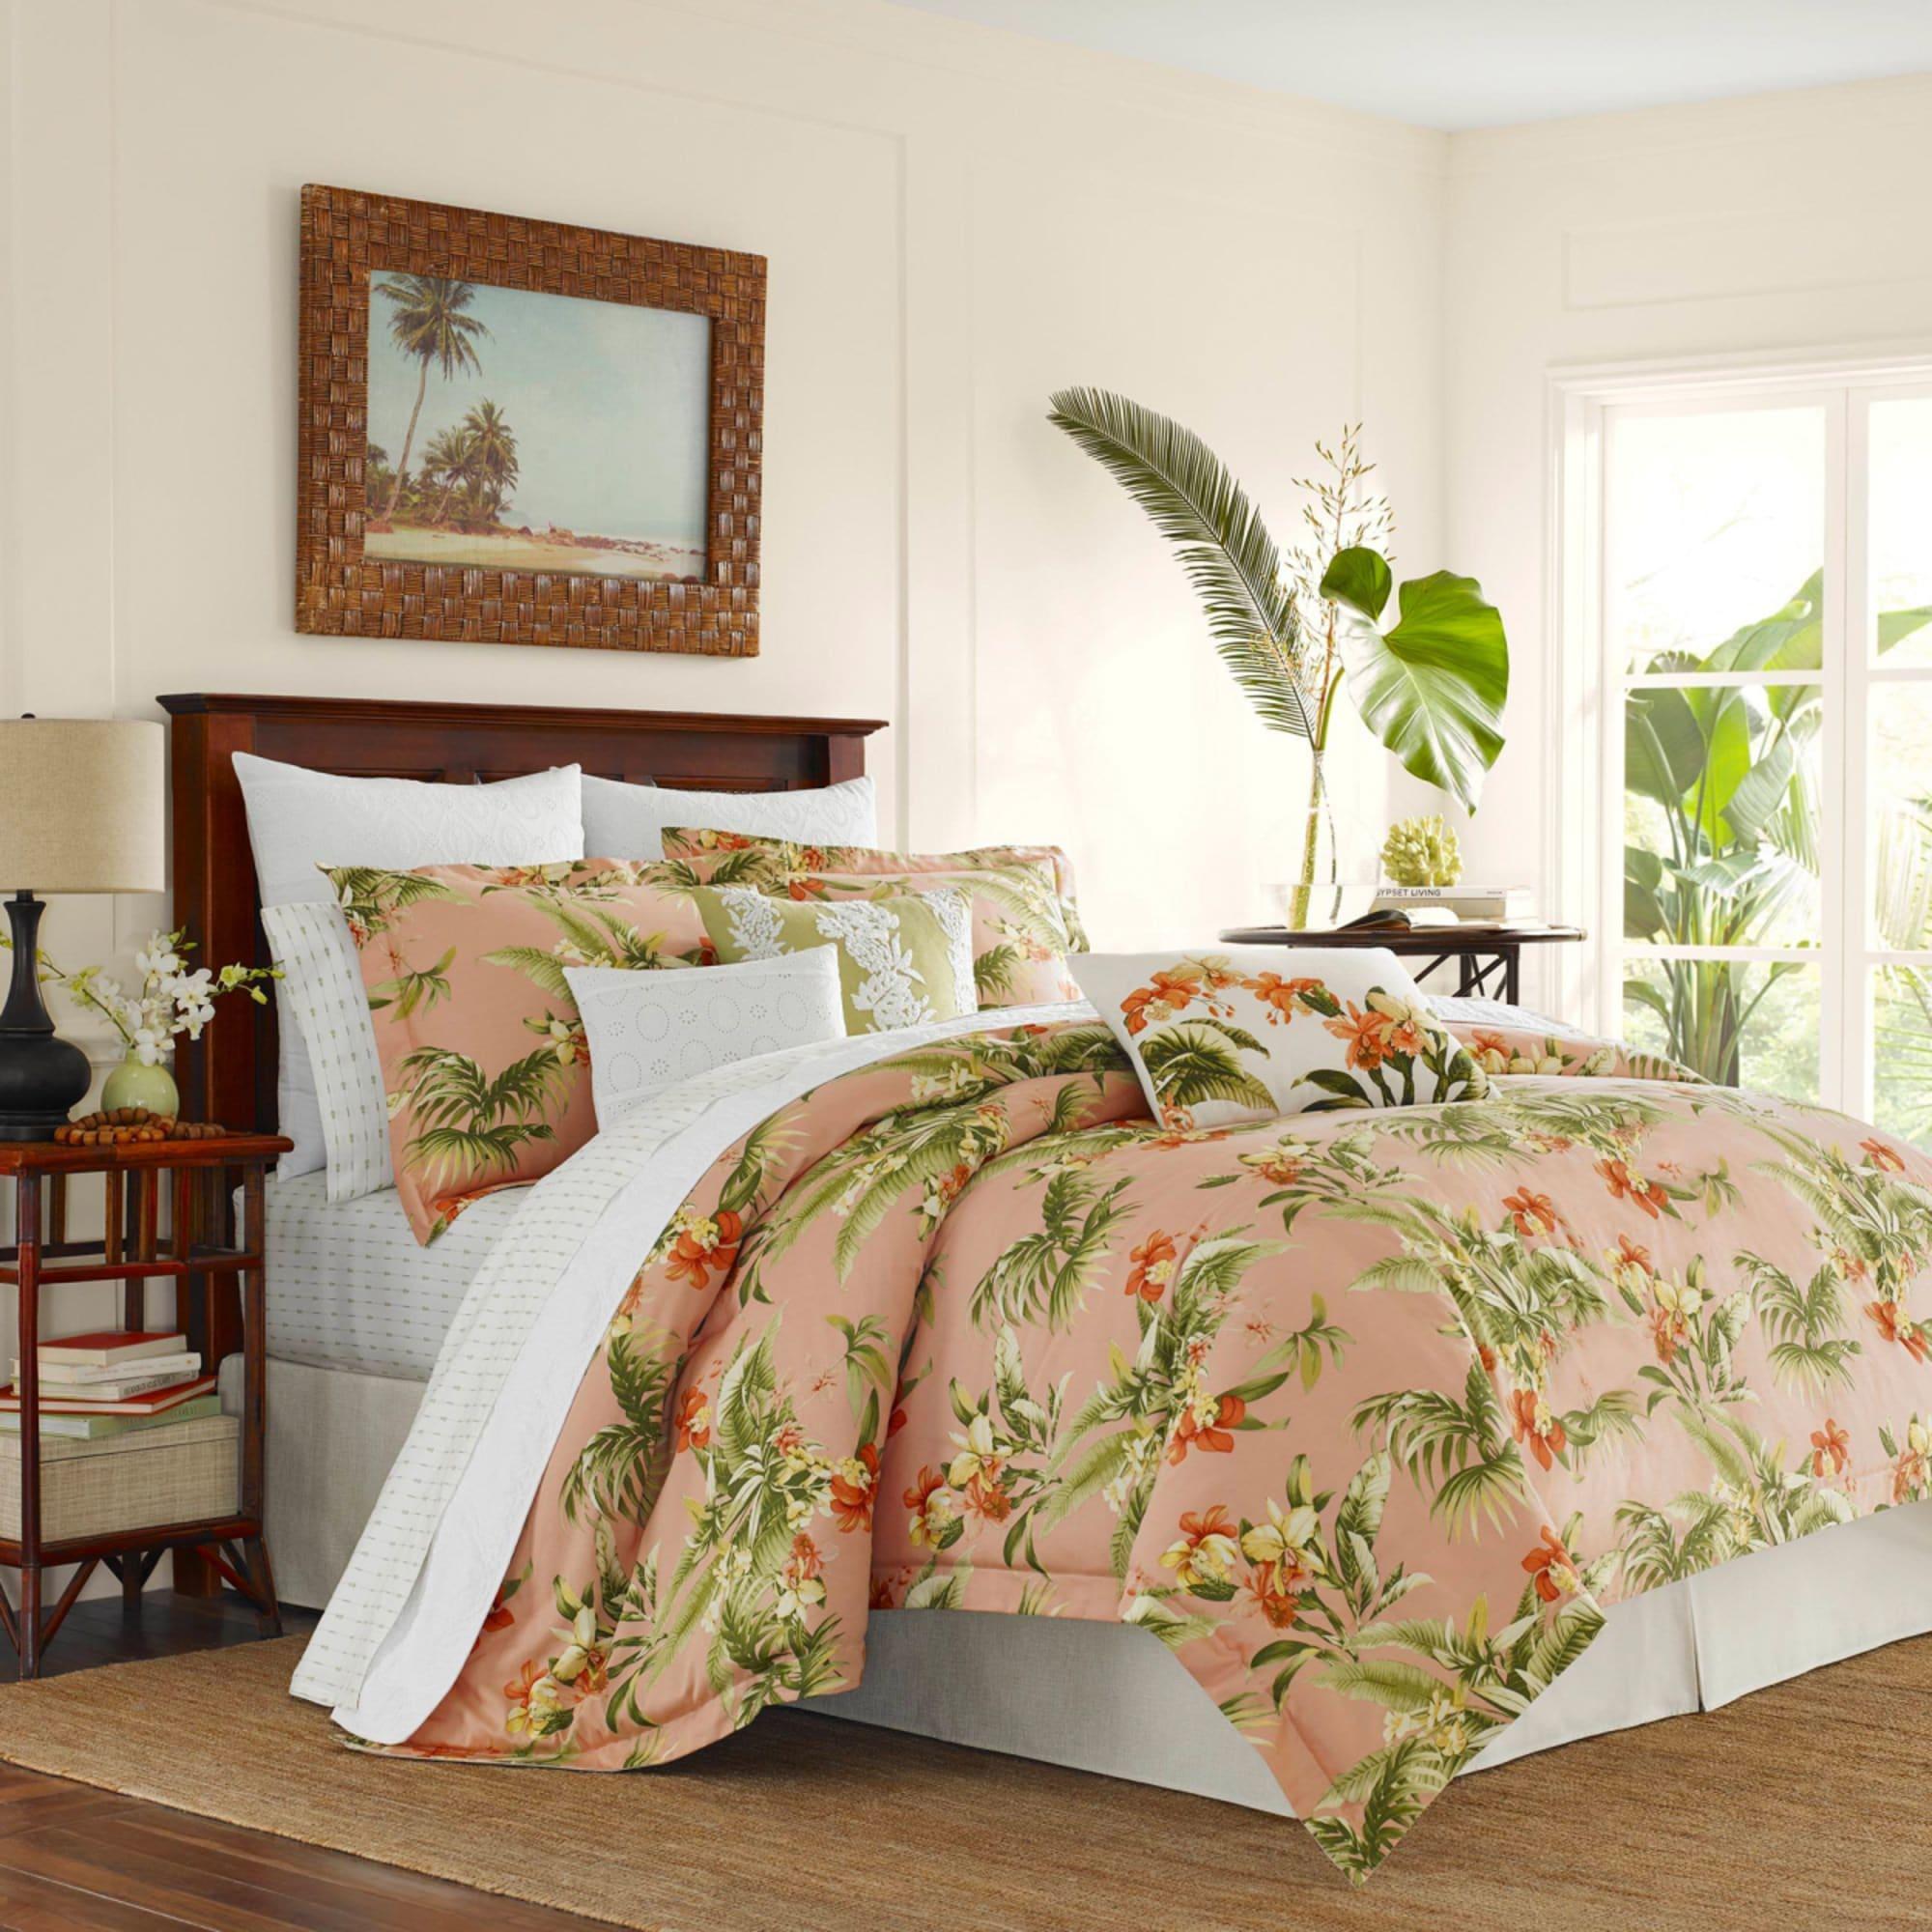 Tommy Bahama Siesta Key Quilt Cover Set King Image 3